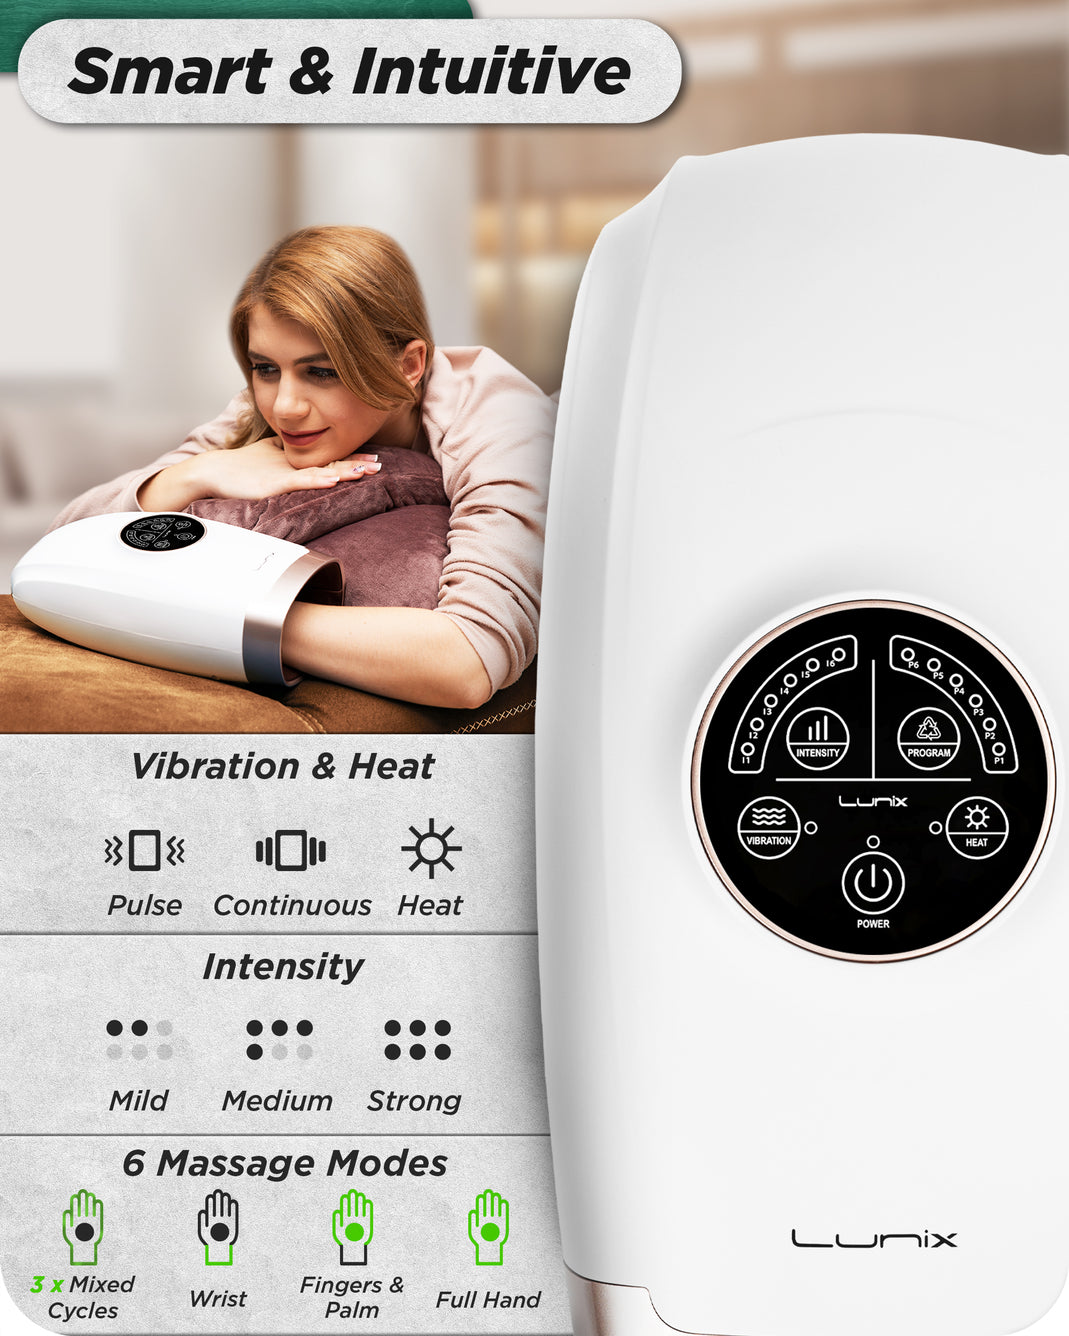 cotsoco Electric Hand Massager for Palm Massage, Cordless Massager with 3  Levels Compression & Heat,…See more cotsoco Electric Hand Massager for Palm